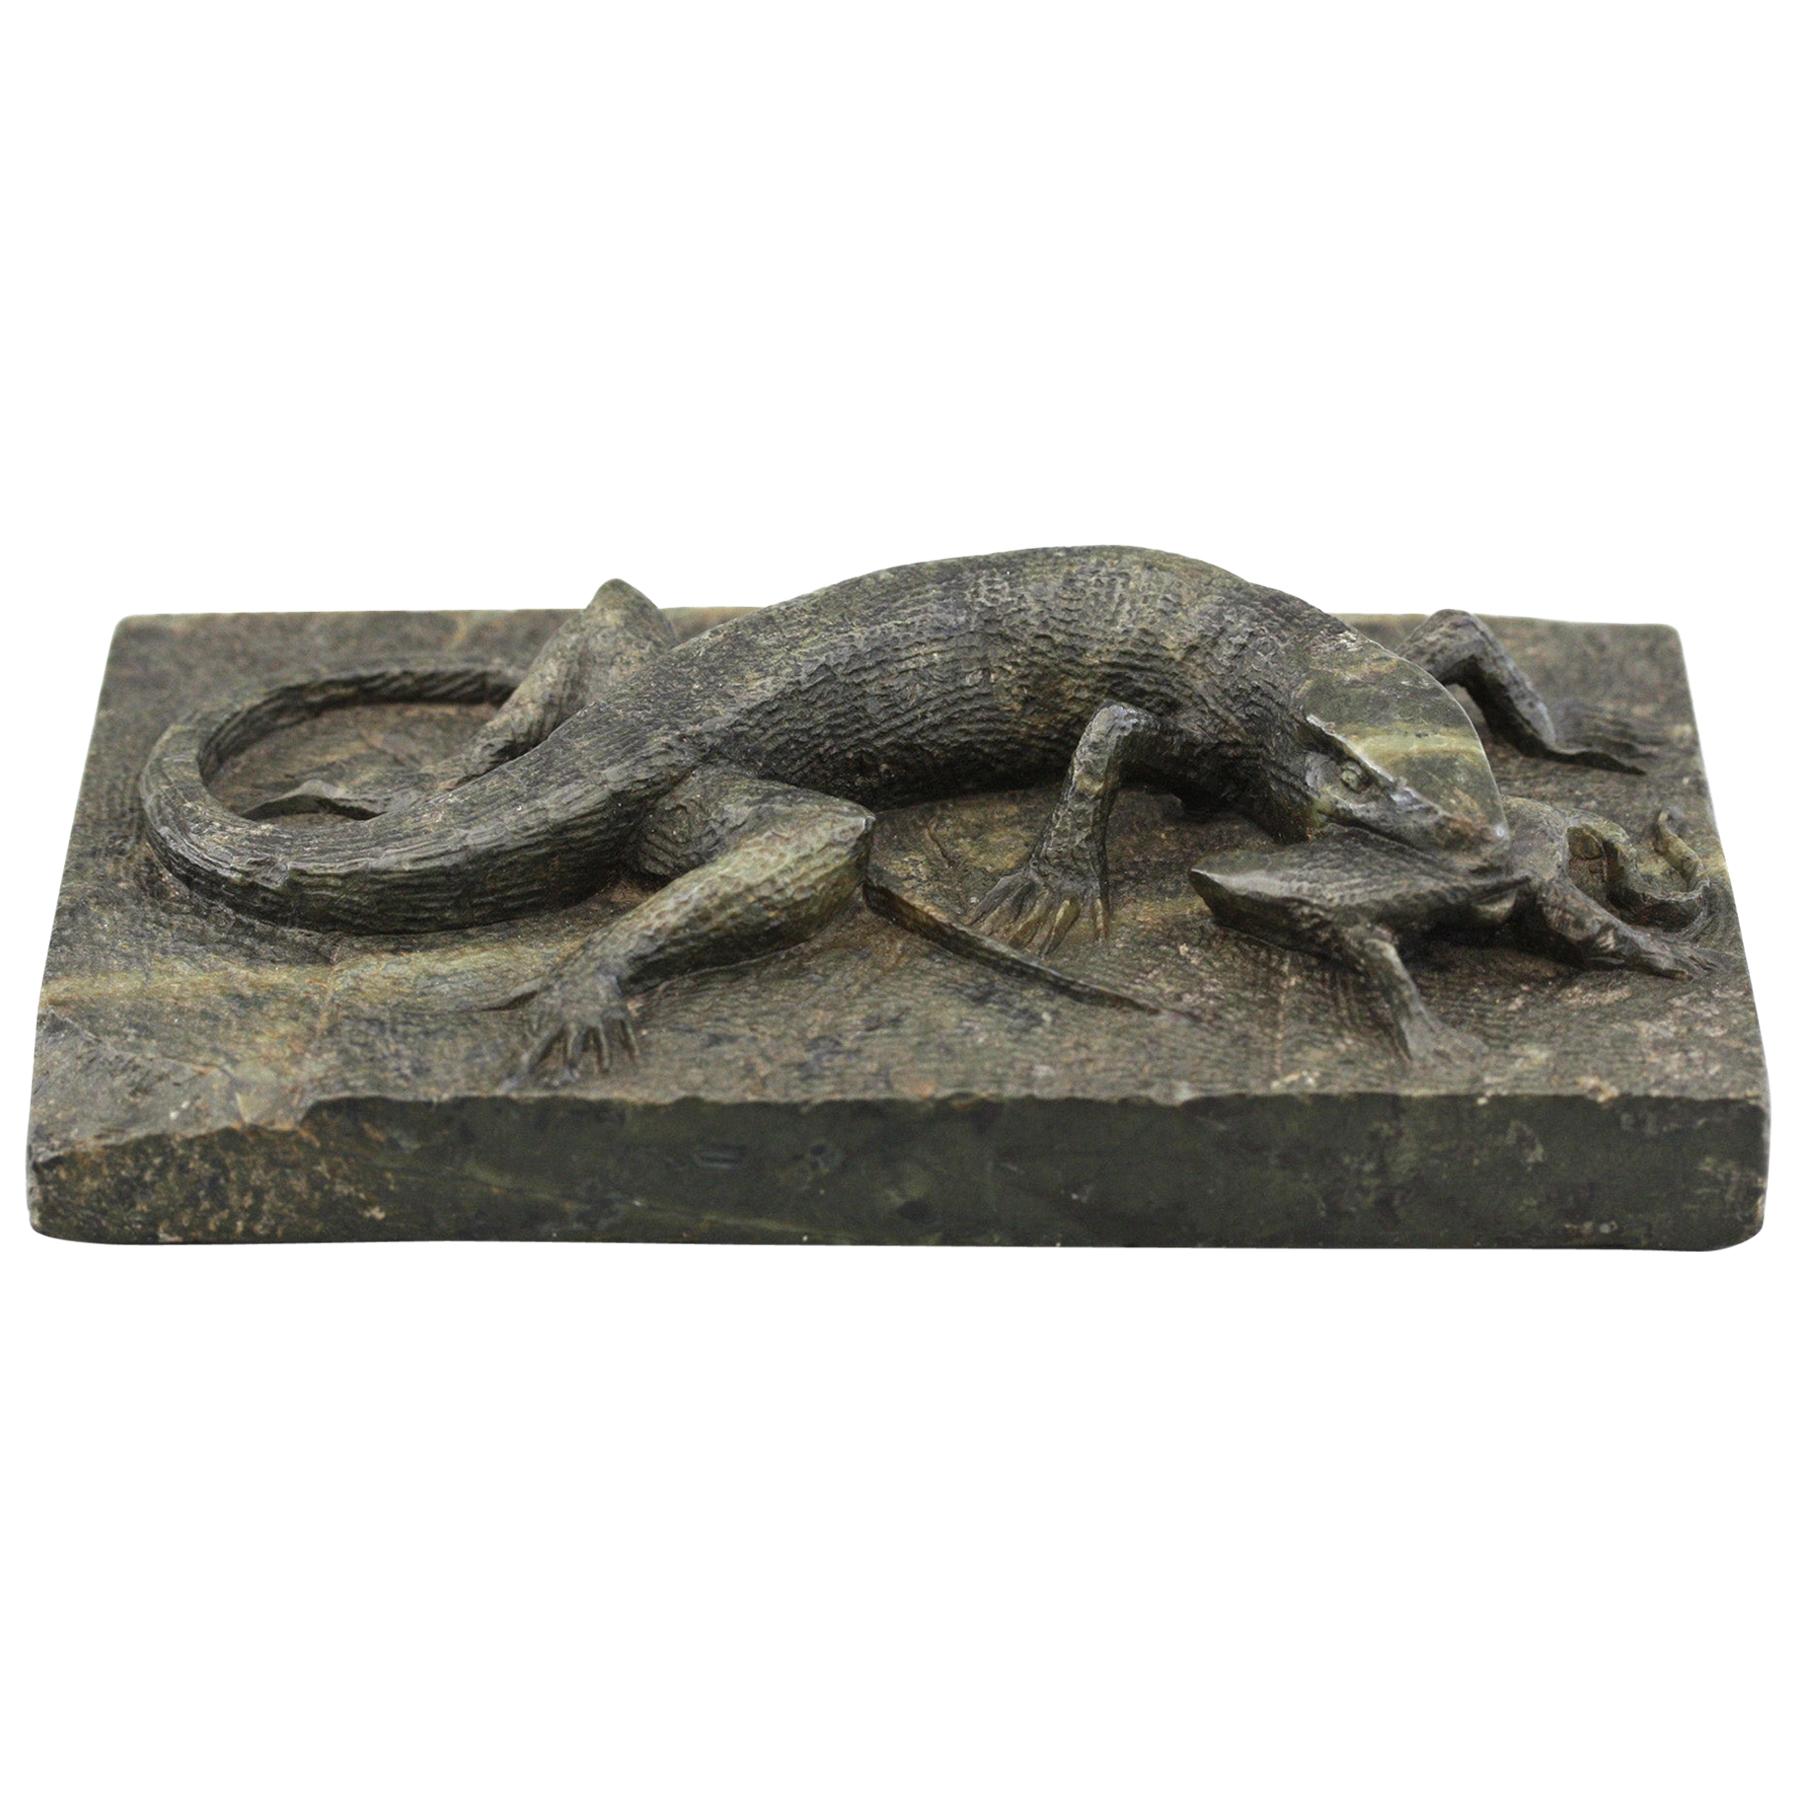 Unusual Antique Hand Carved Lizard and Prey Hard Stone Desk Weight, 19th Century